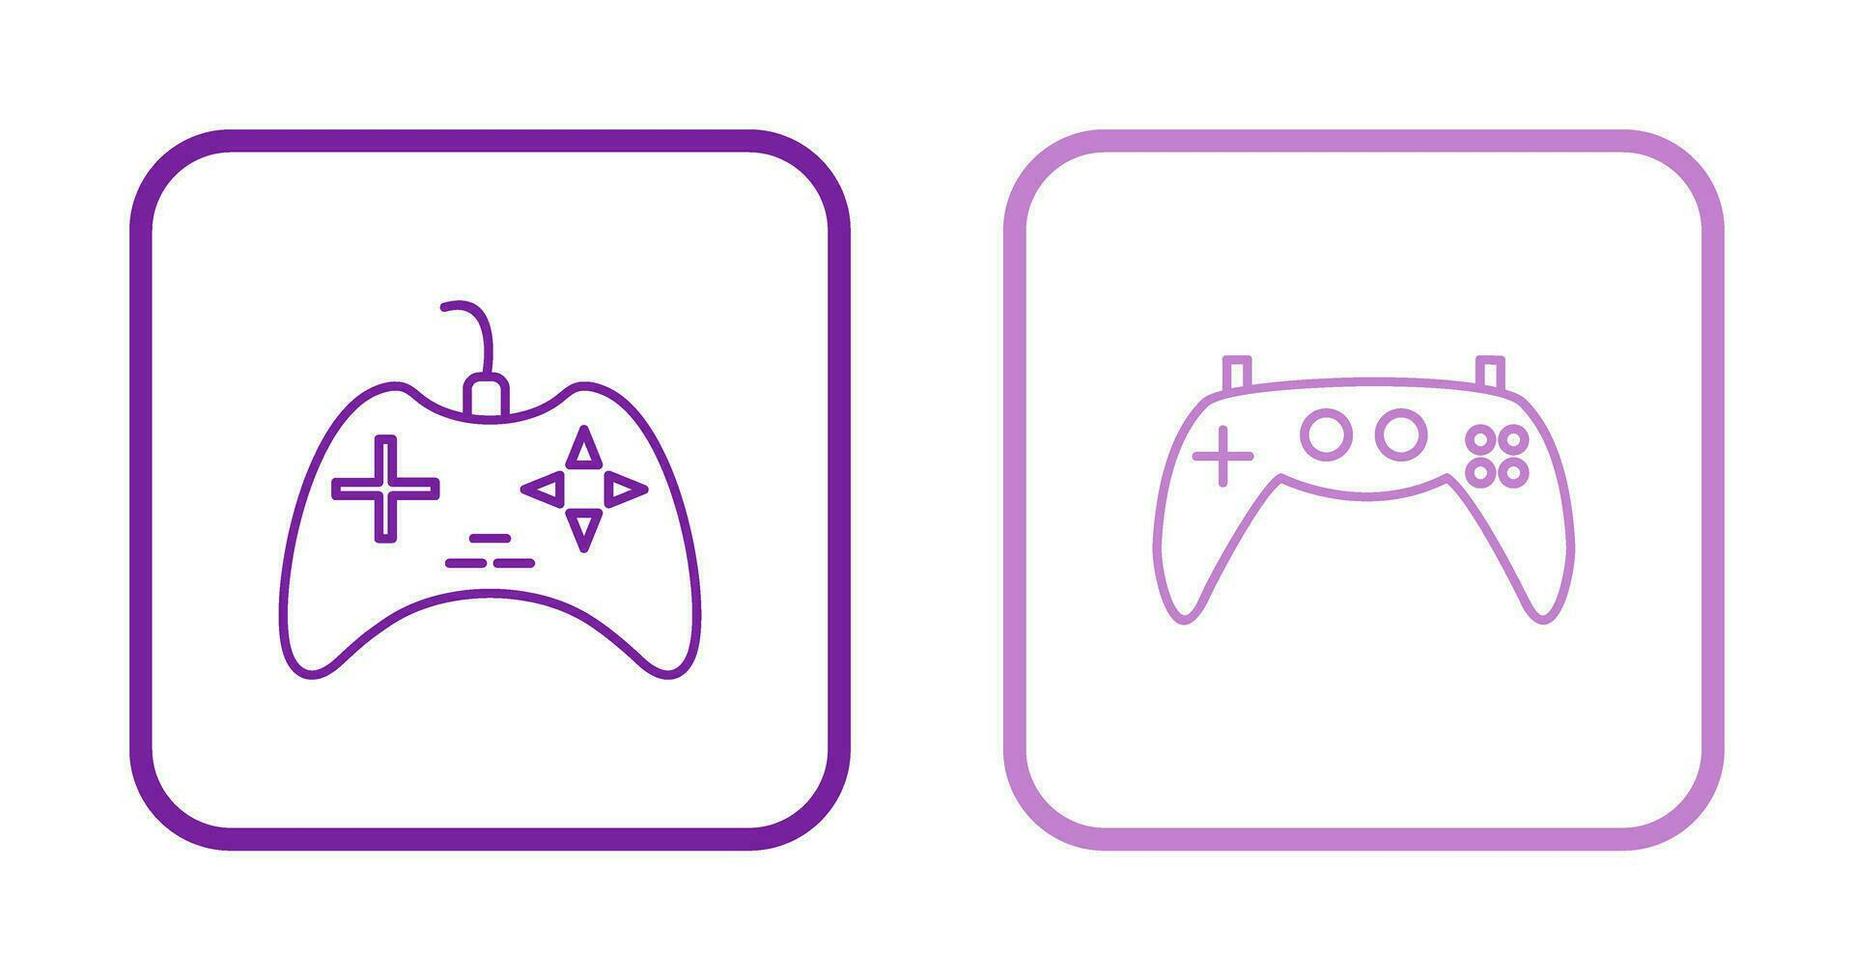 Gaming Console and Gaming Console Icon vector